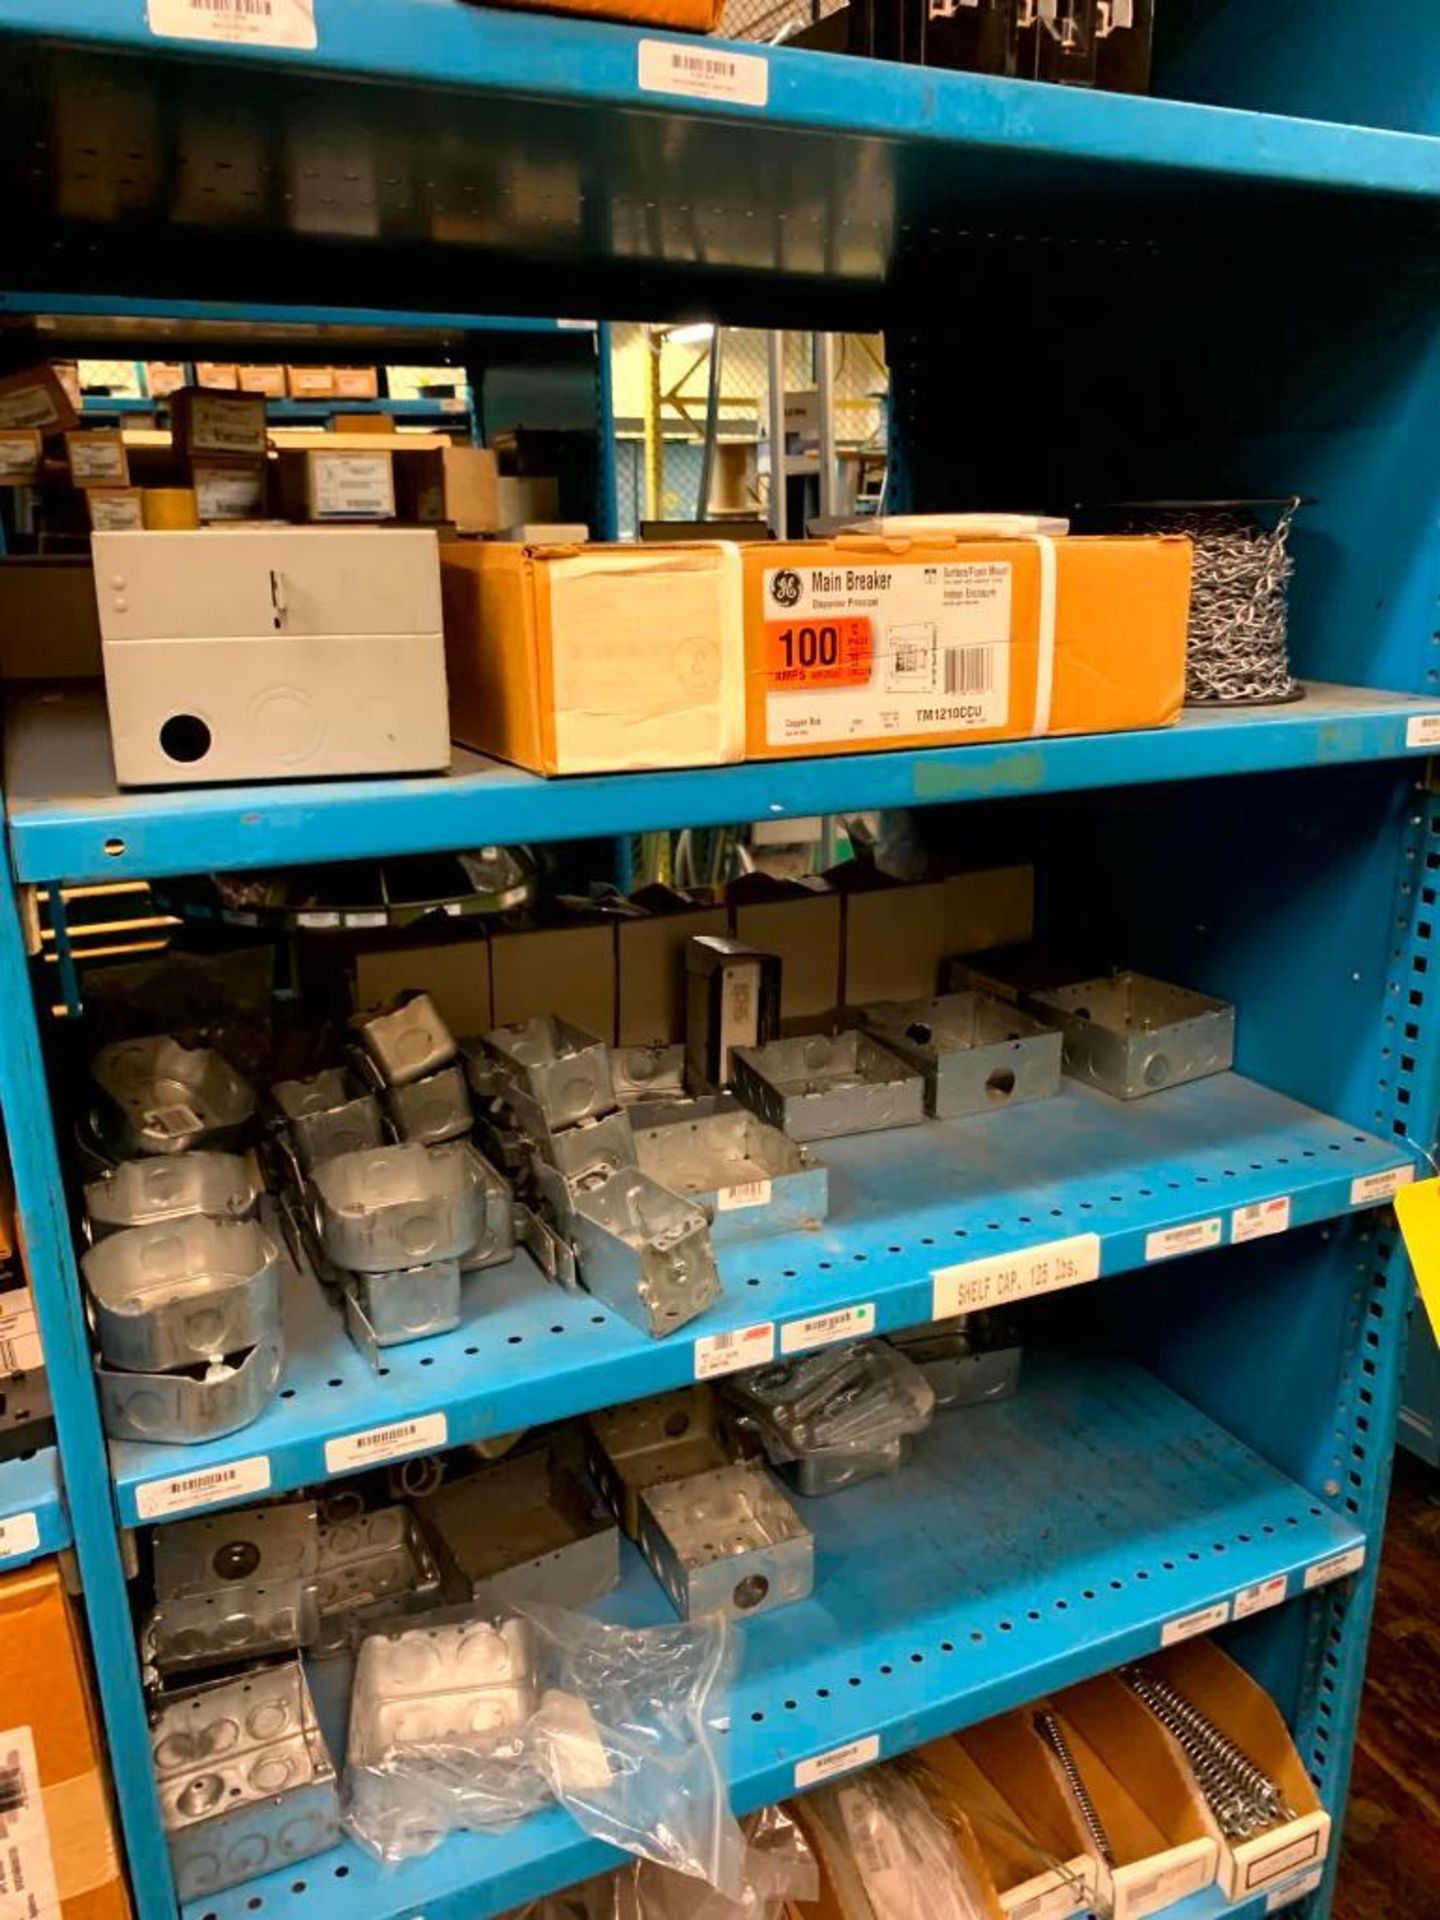 Content on (22) Bays of Clip Shelving: Transformers, Safety Switches, Magnetic Starters, Enclosures, - Image 11 of 74